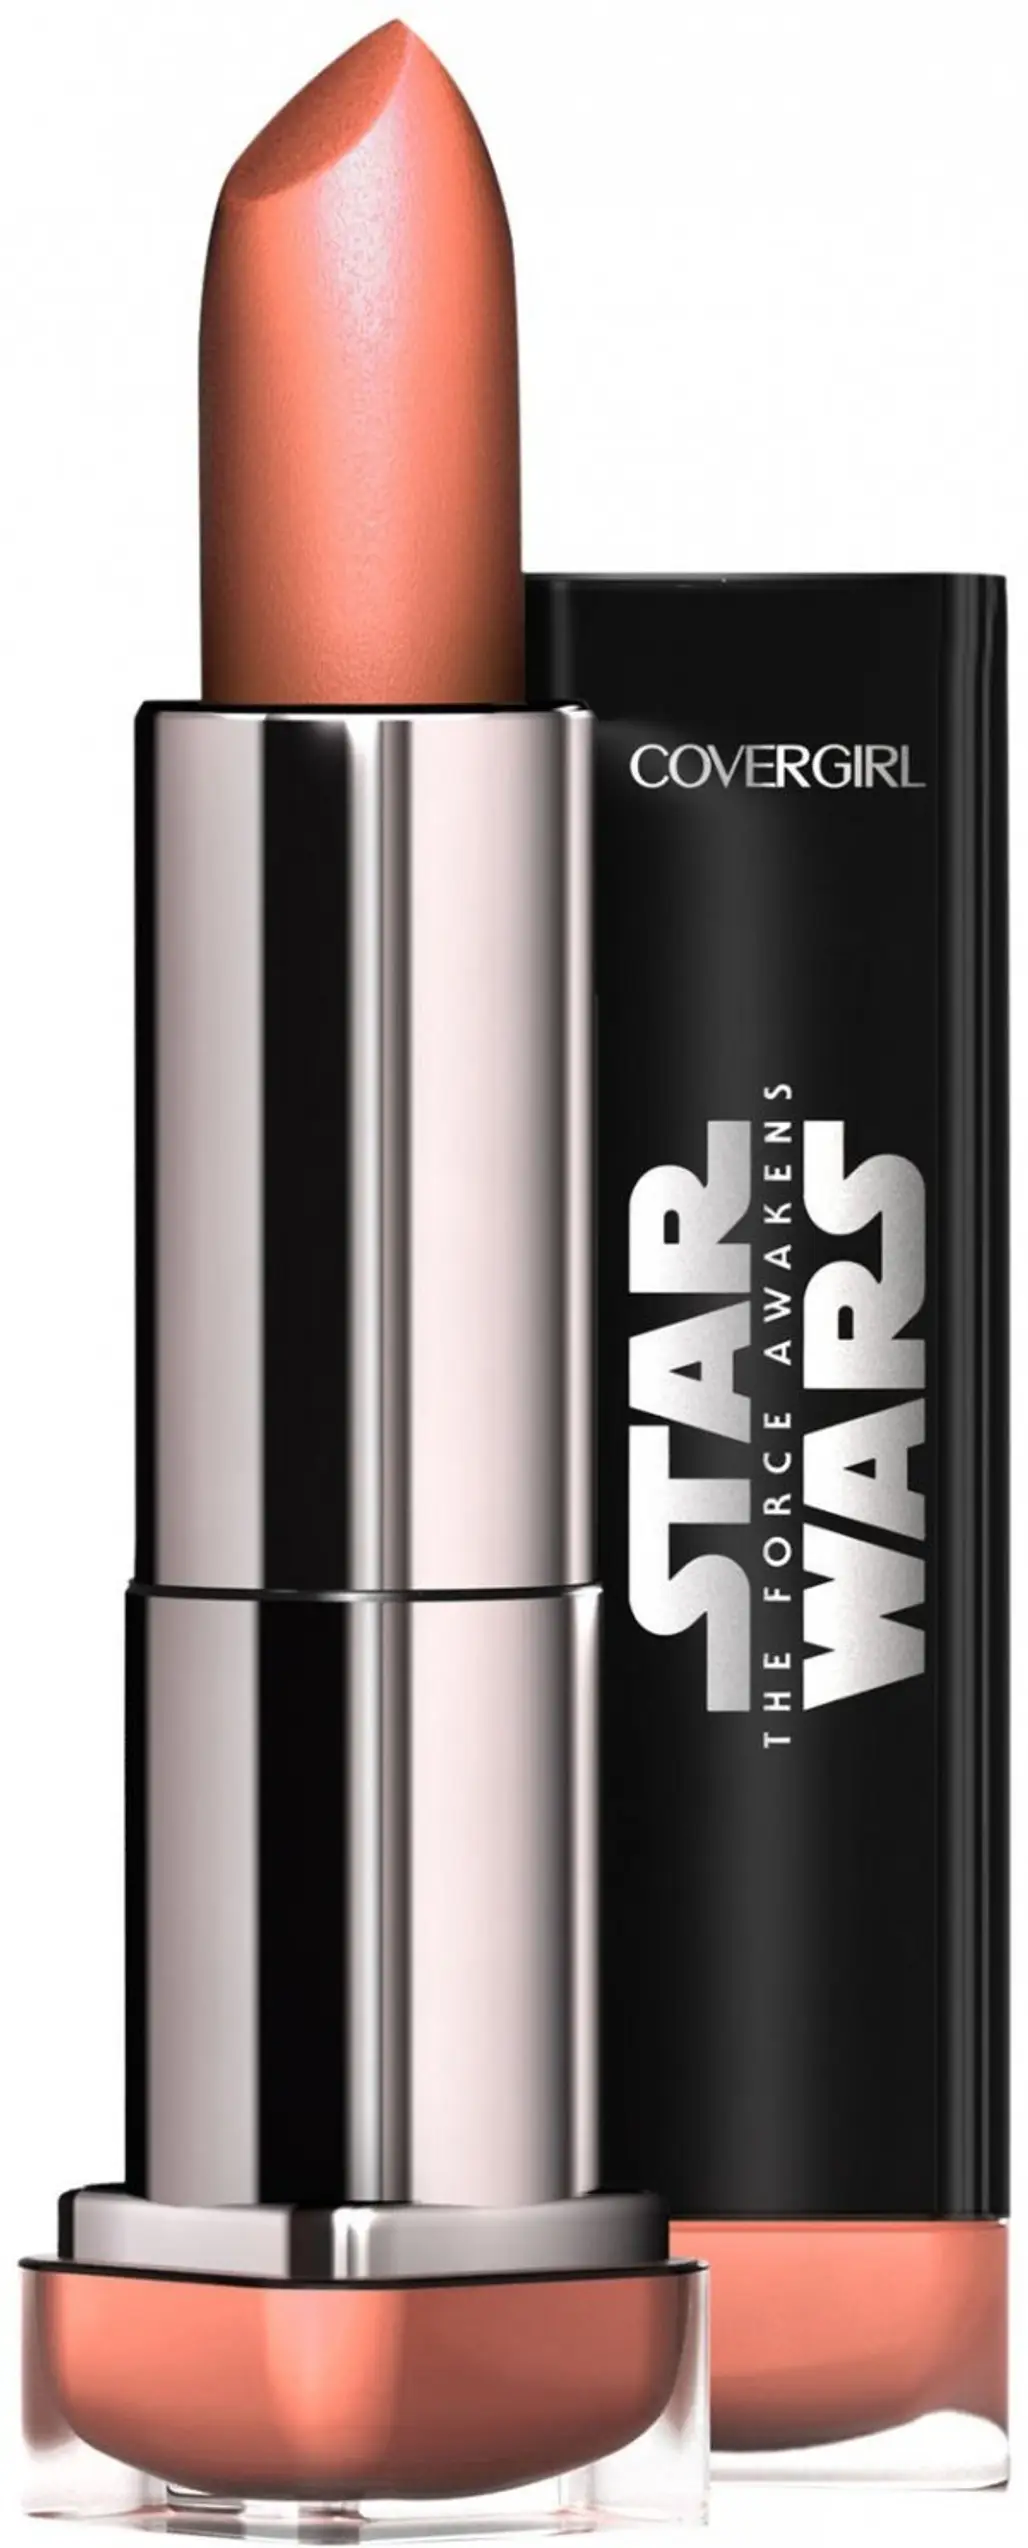 CoverGirl Star Wars Colorlicious Lipstick in Nude